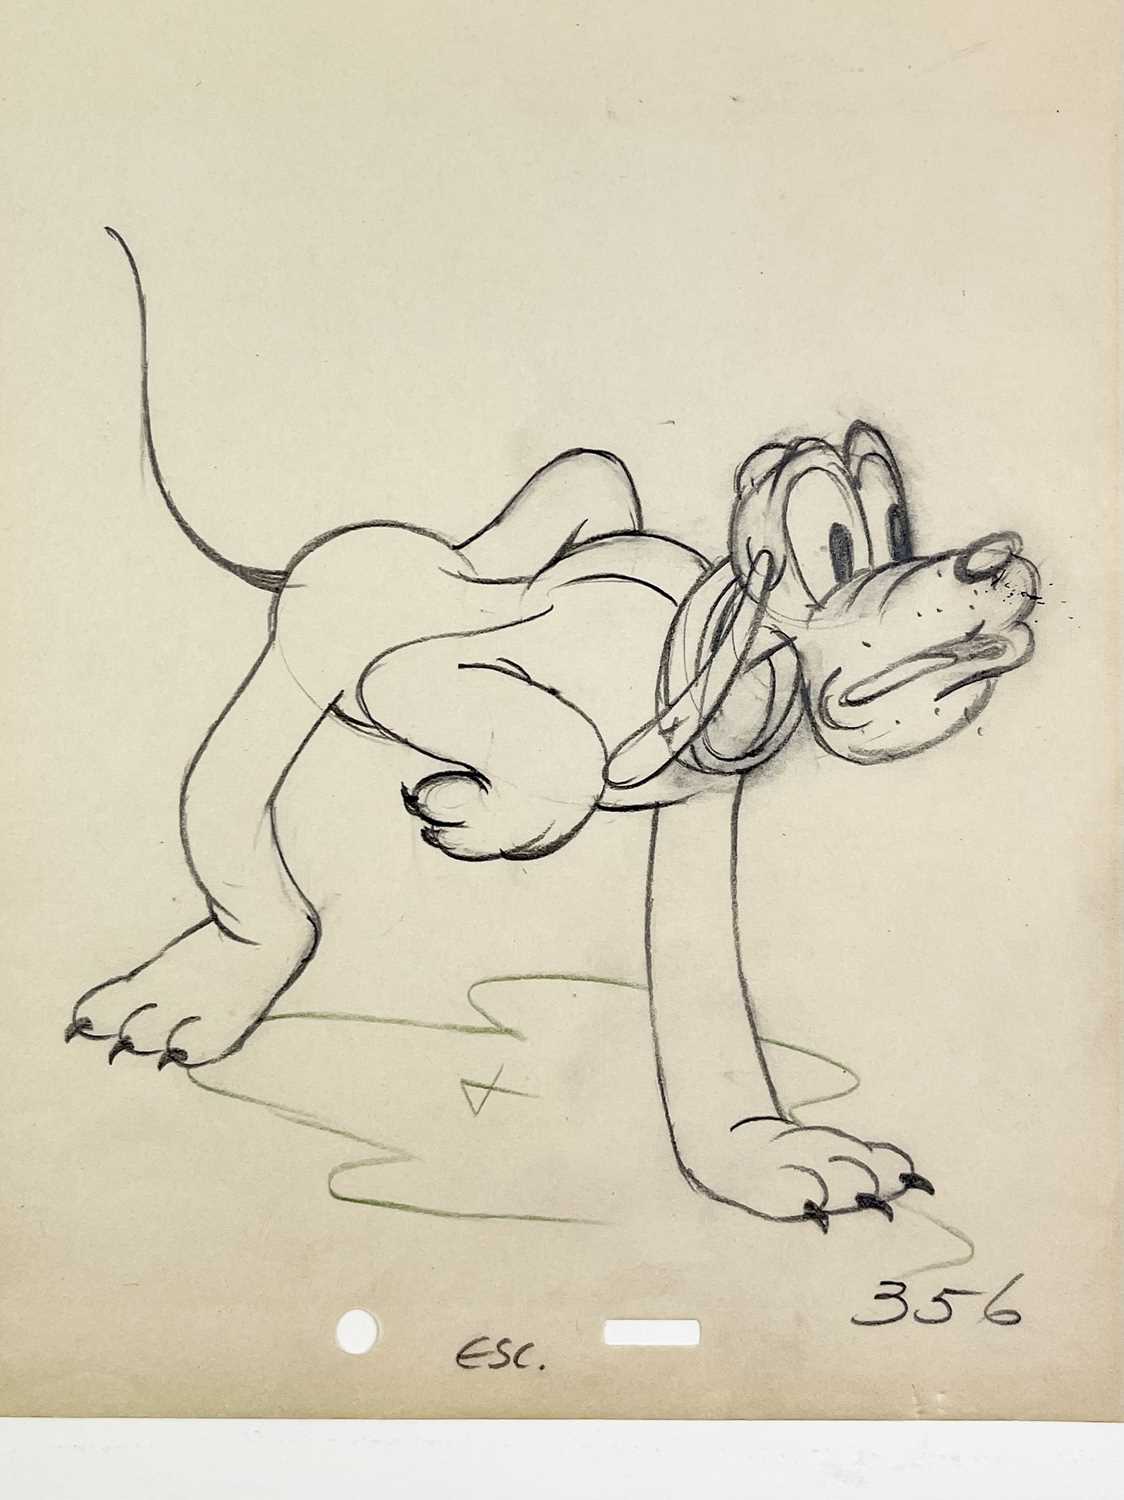 DISNEY INTEREST. A graphite animation still of 'Pluto' the dog, drawn in the corner of paper in